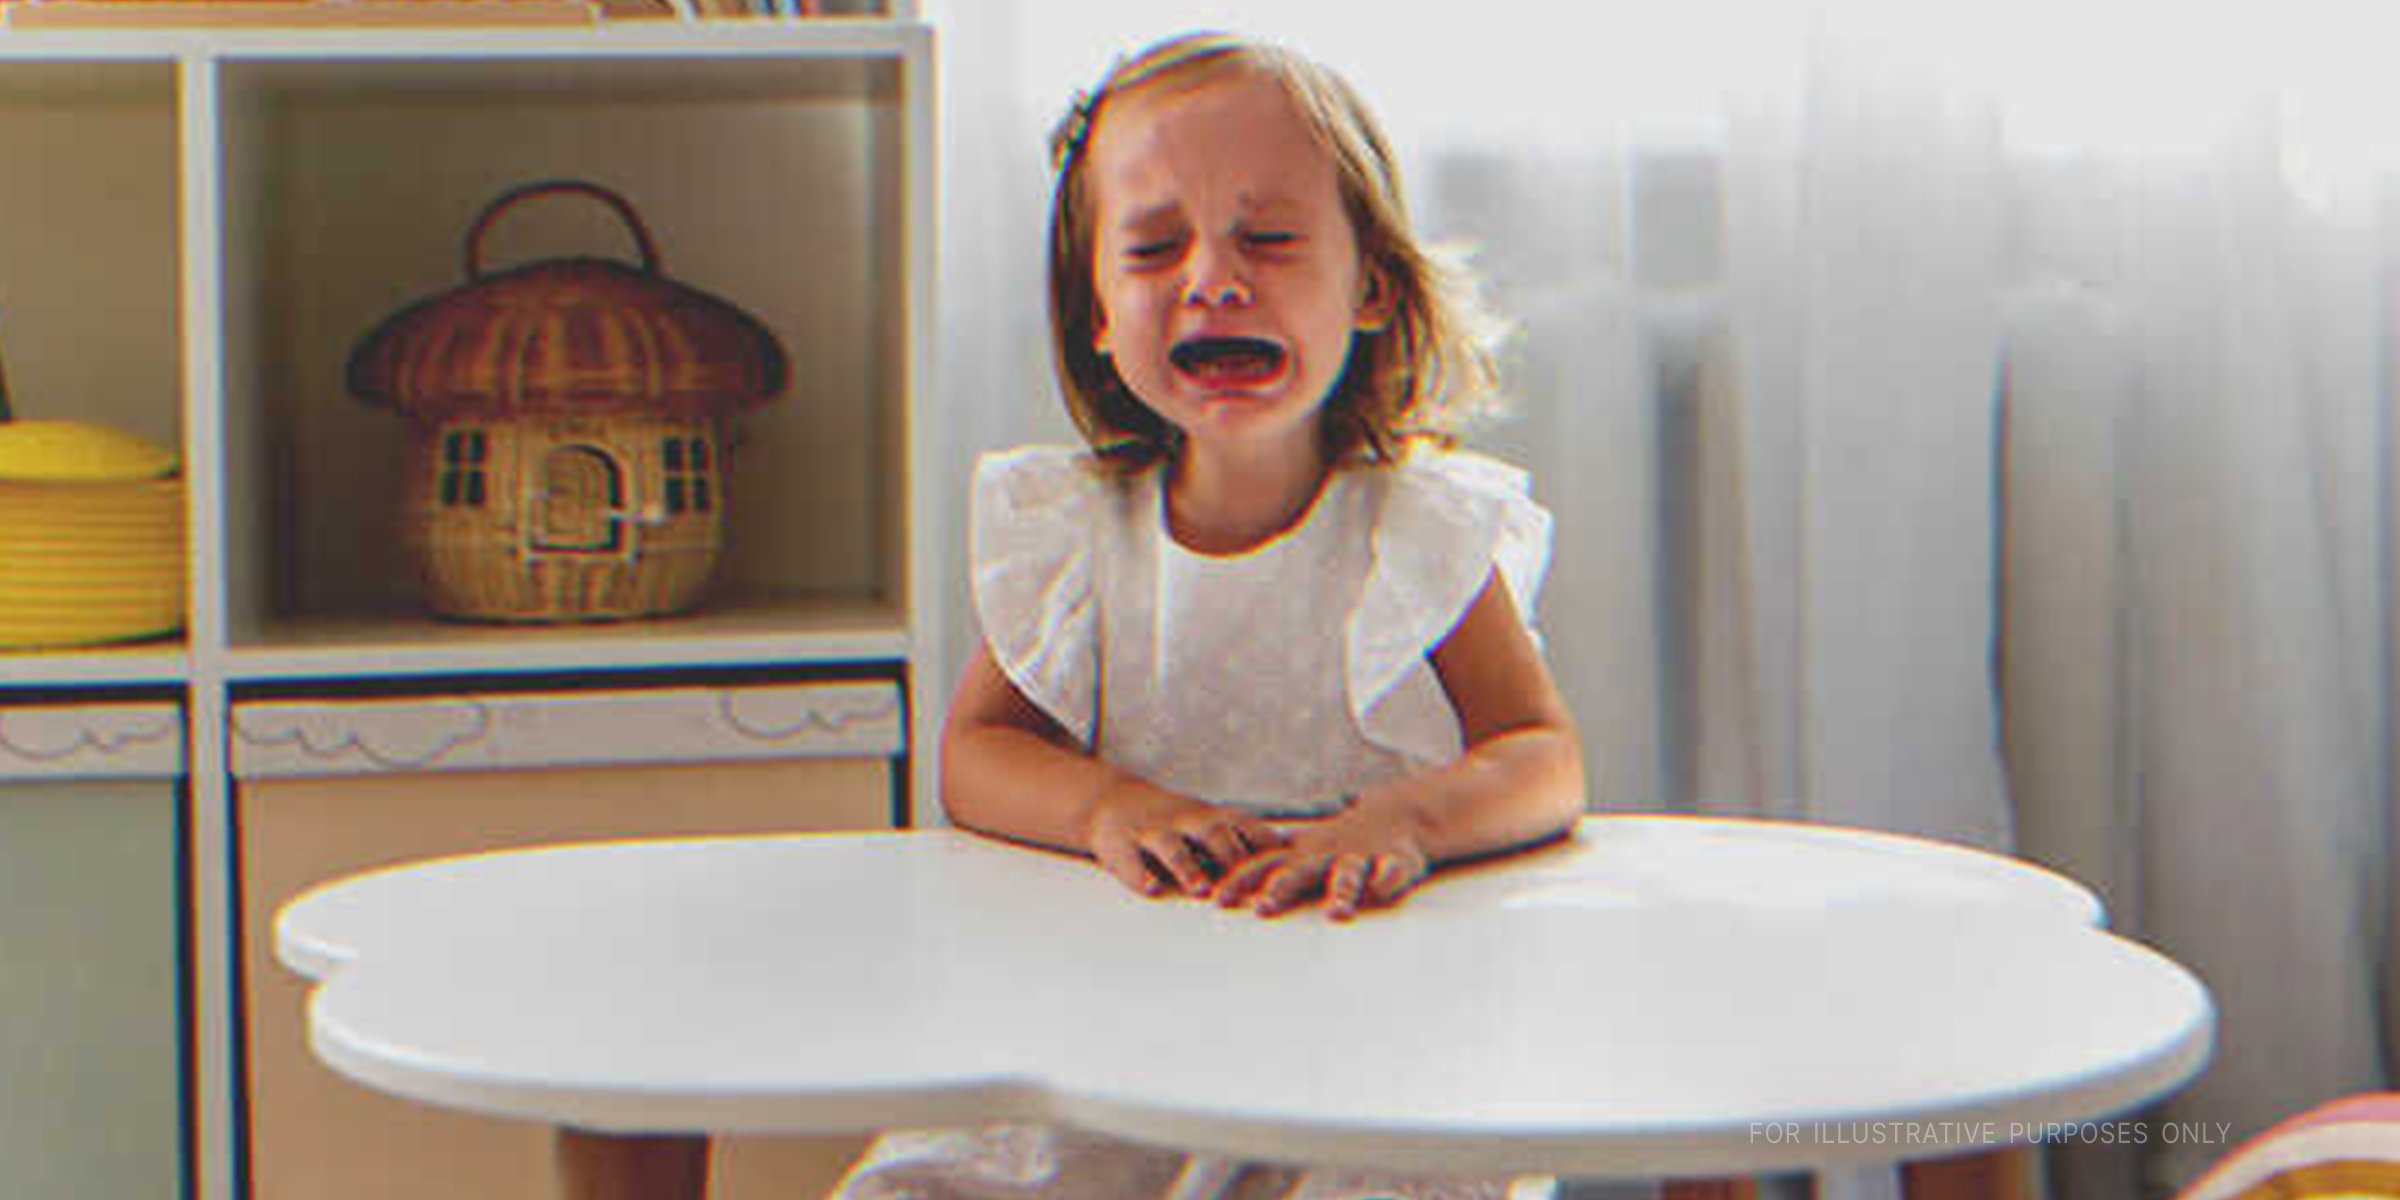 Little girl crying alone | Source: Getty Images 